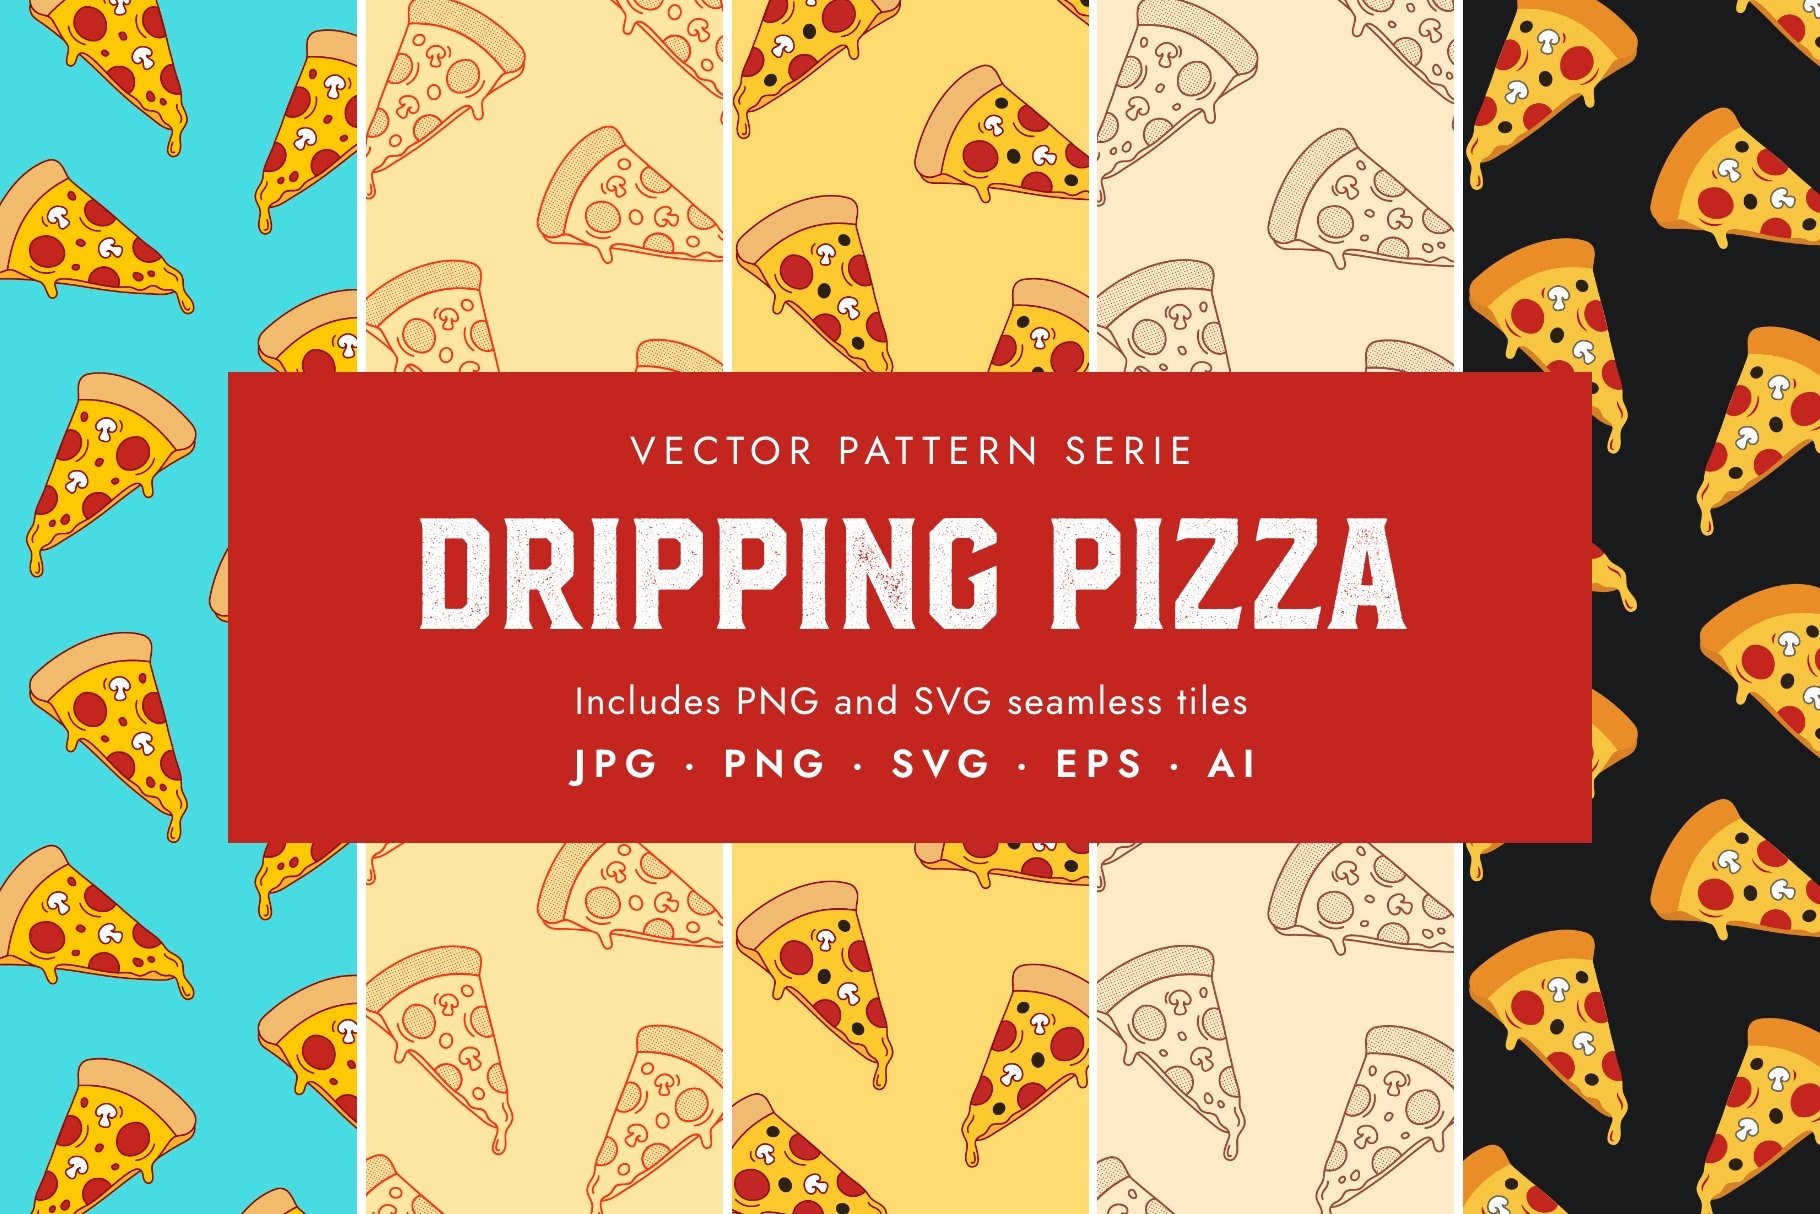 Pizza Slice Seamless Vector Pattern cover image.